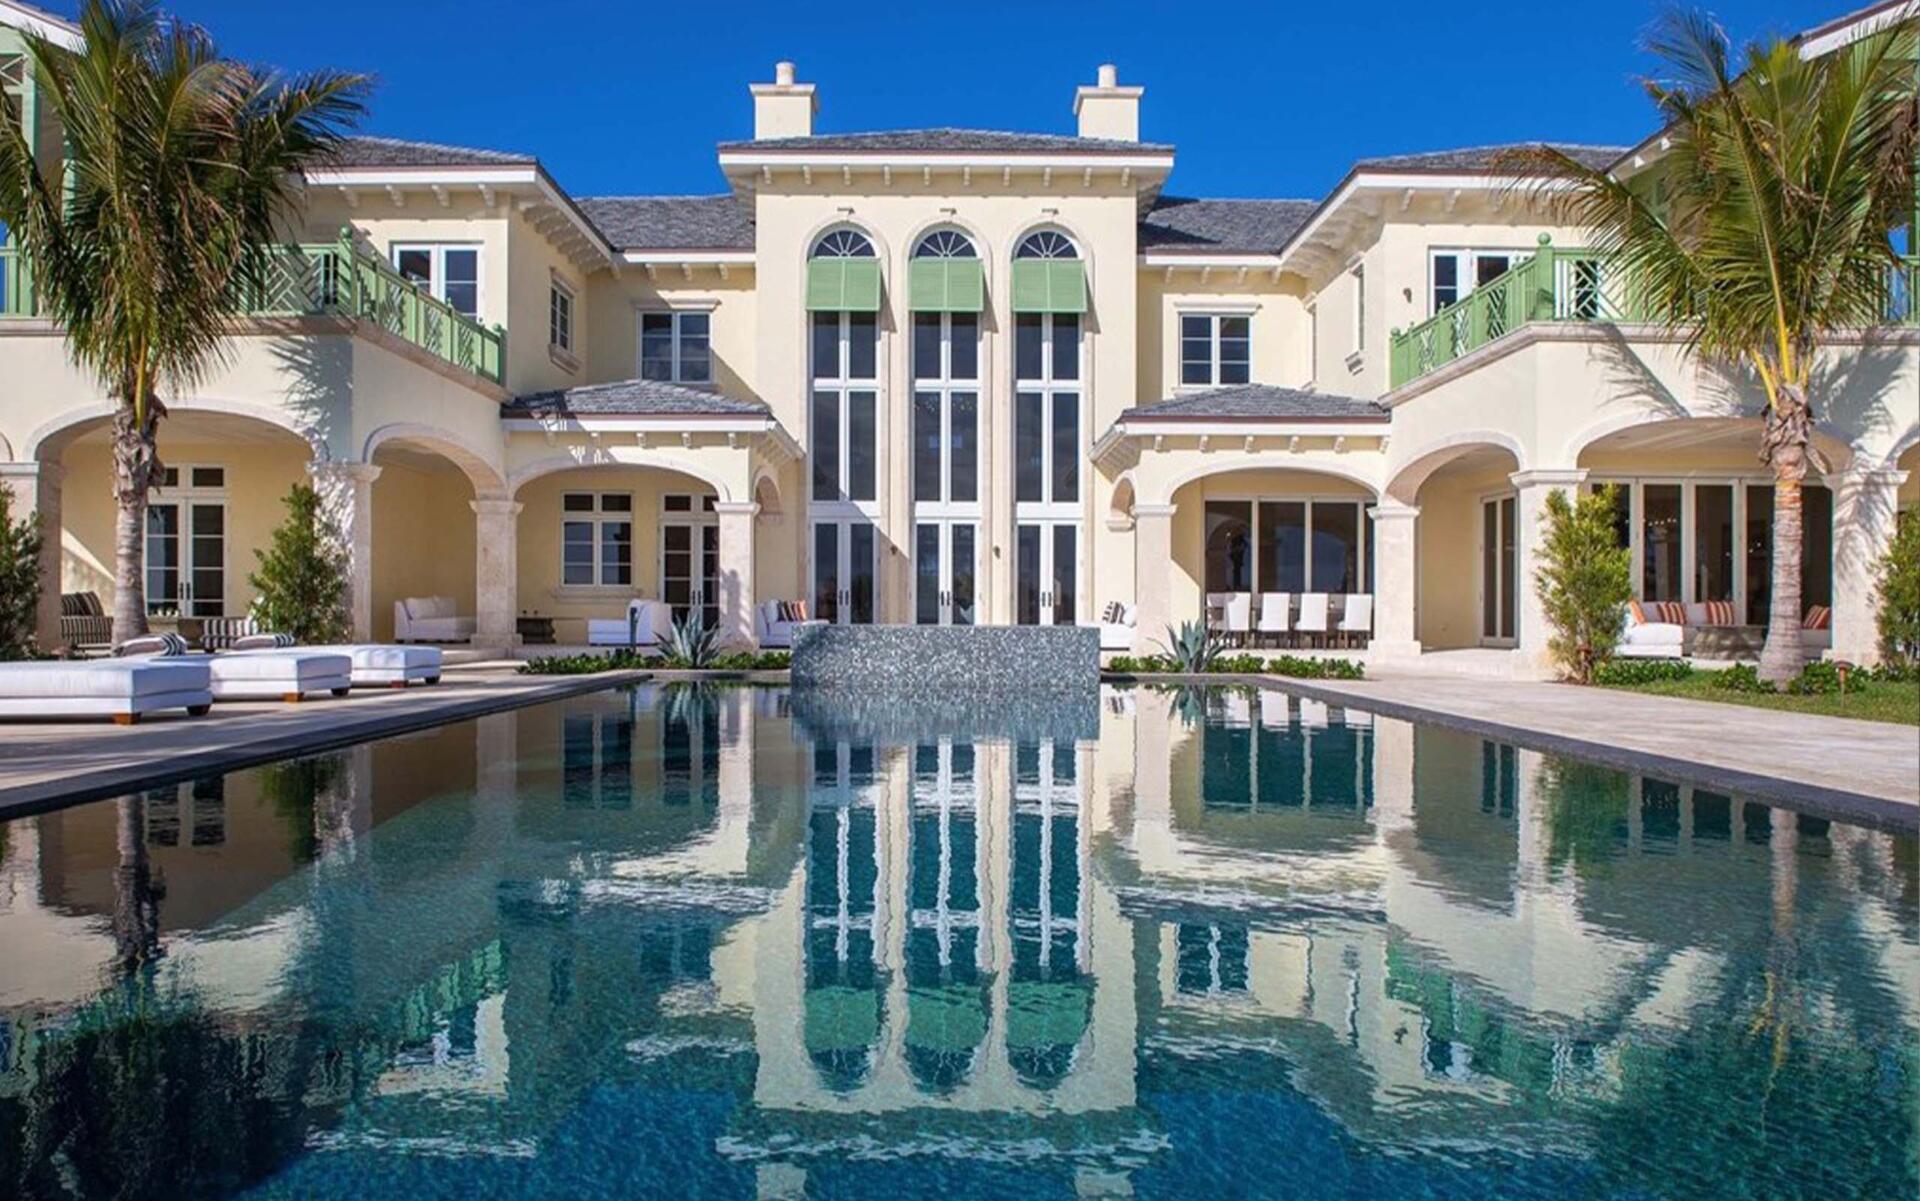 Actual photograph of the rearview of the Vero Beach mansion, in Florida